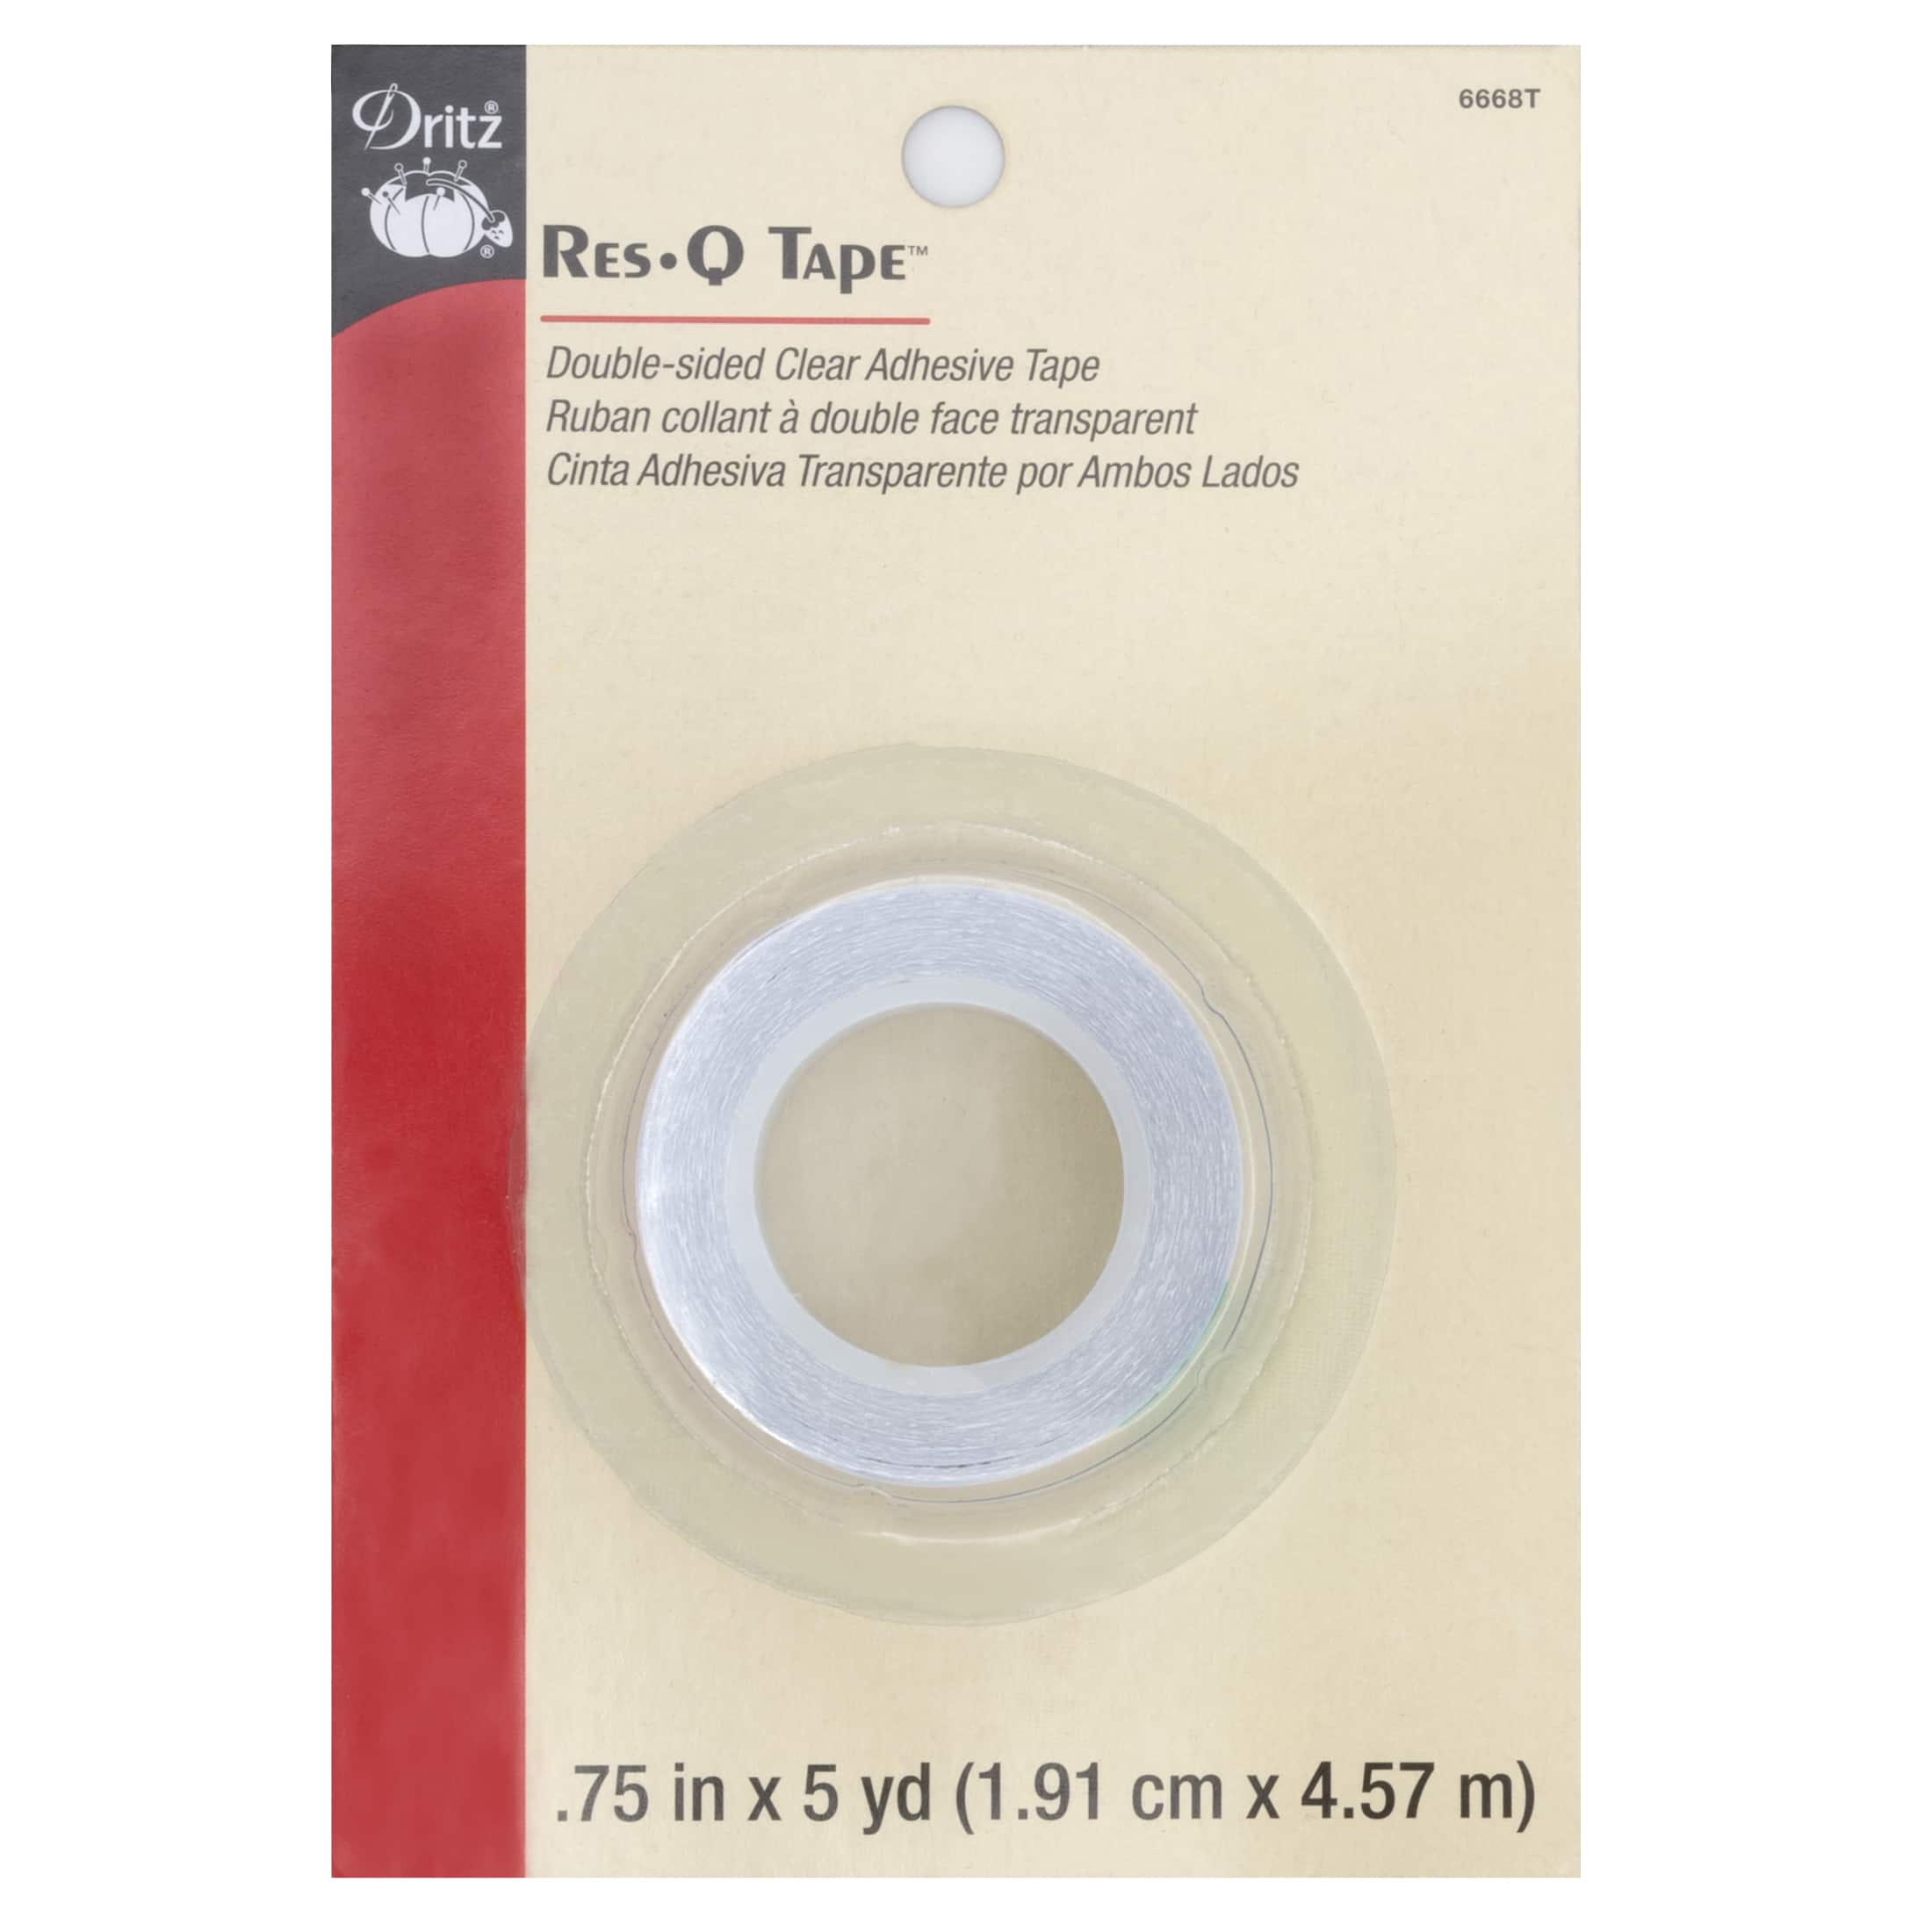 Afspejling lever Elegance Res-Q Tape™ Double-Sided Clear Adhesive Tape | Michaels